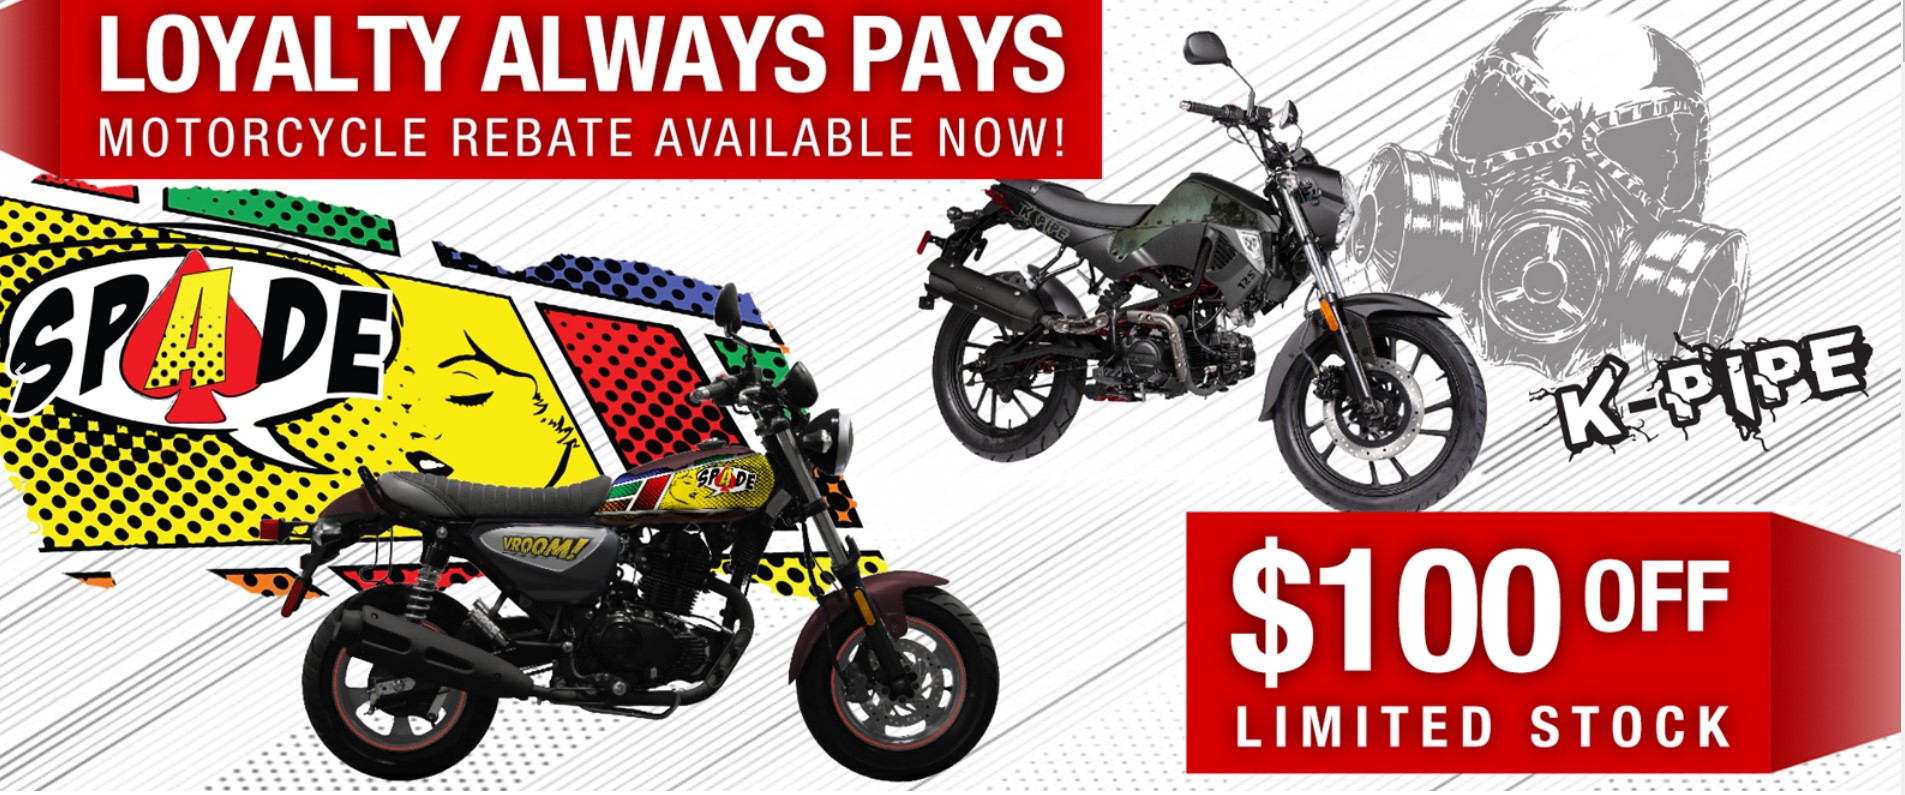 KYMCO's Loyal Motorcycle Customer Promo at Brenny's Motorcycle Clinic, Bettendorf, IA 52722